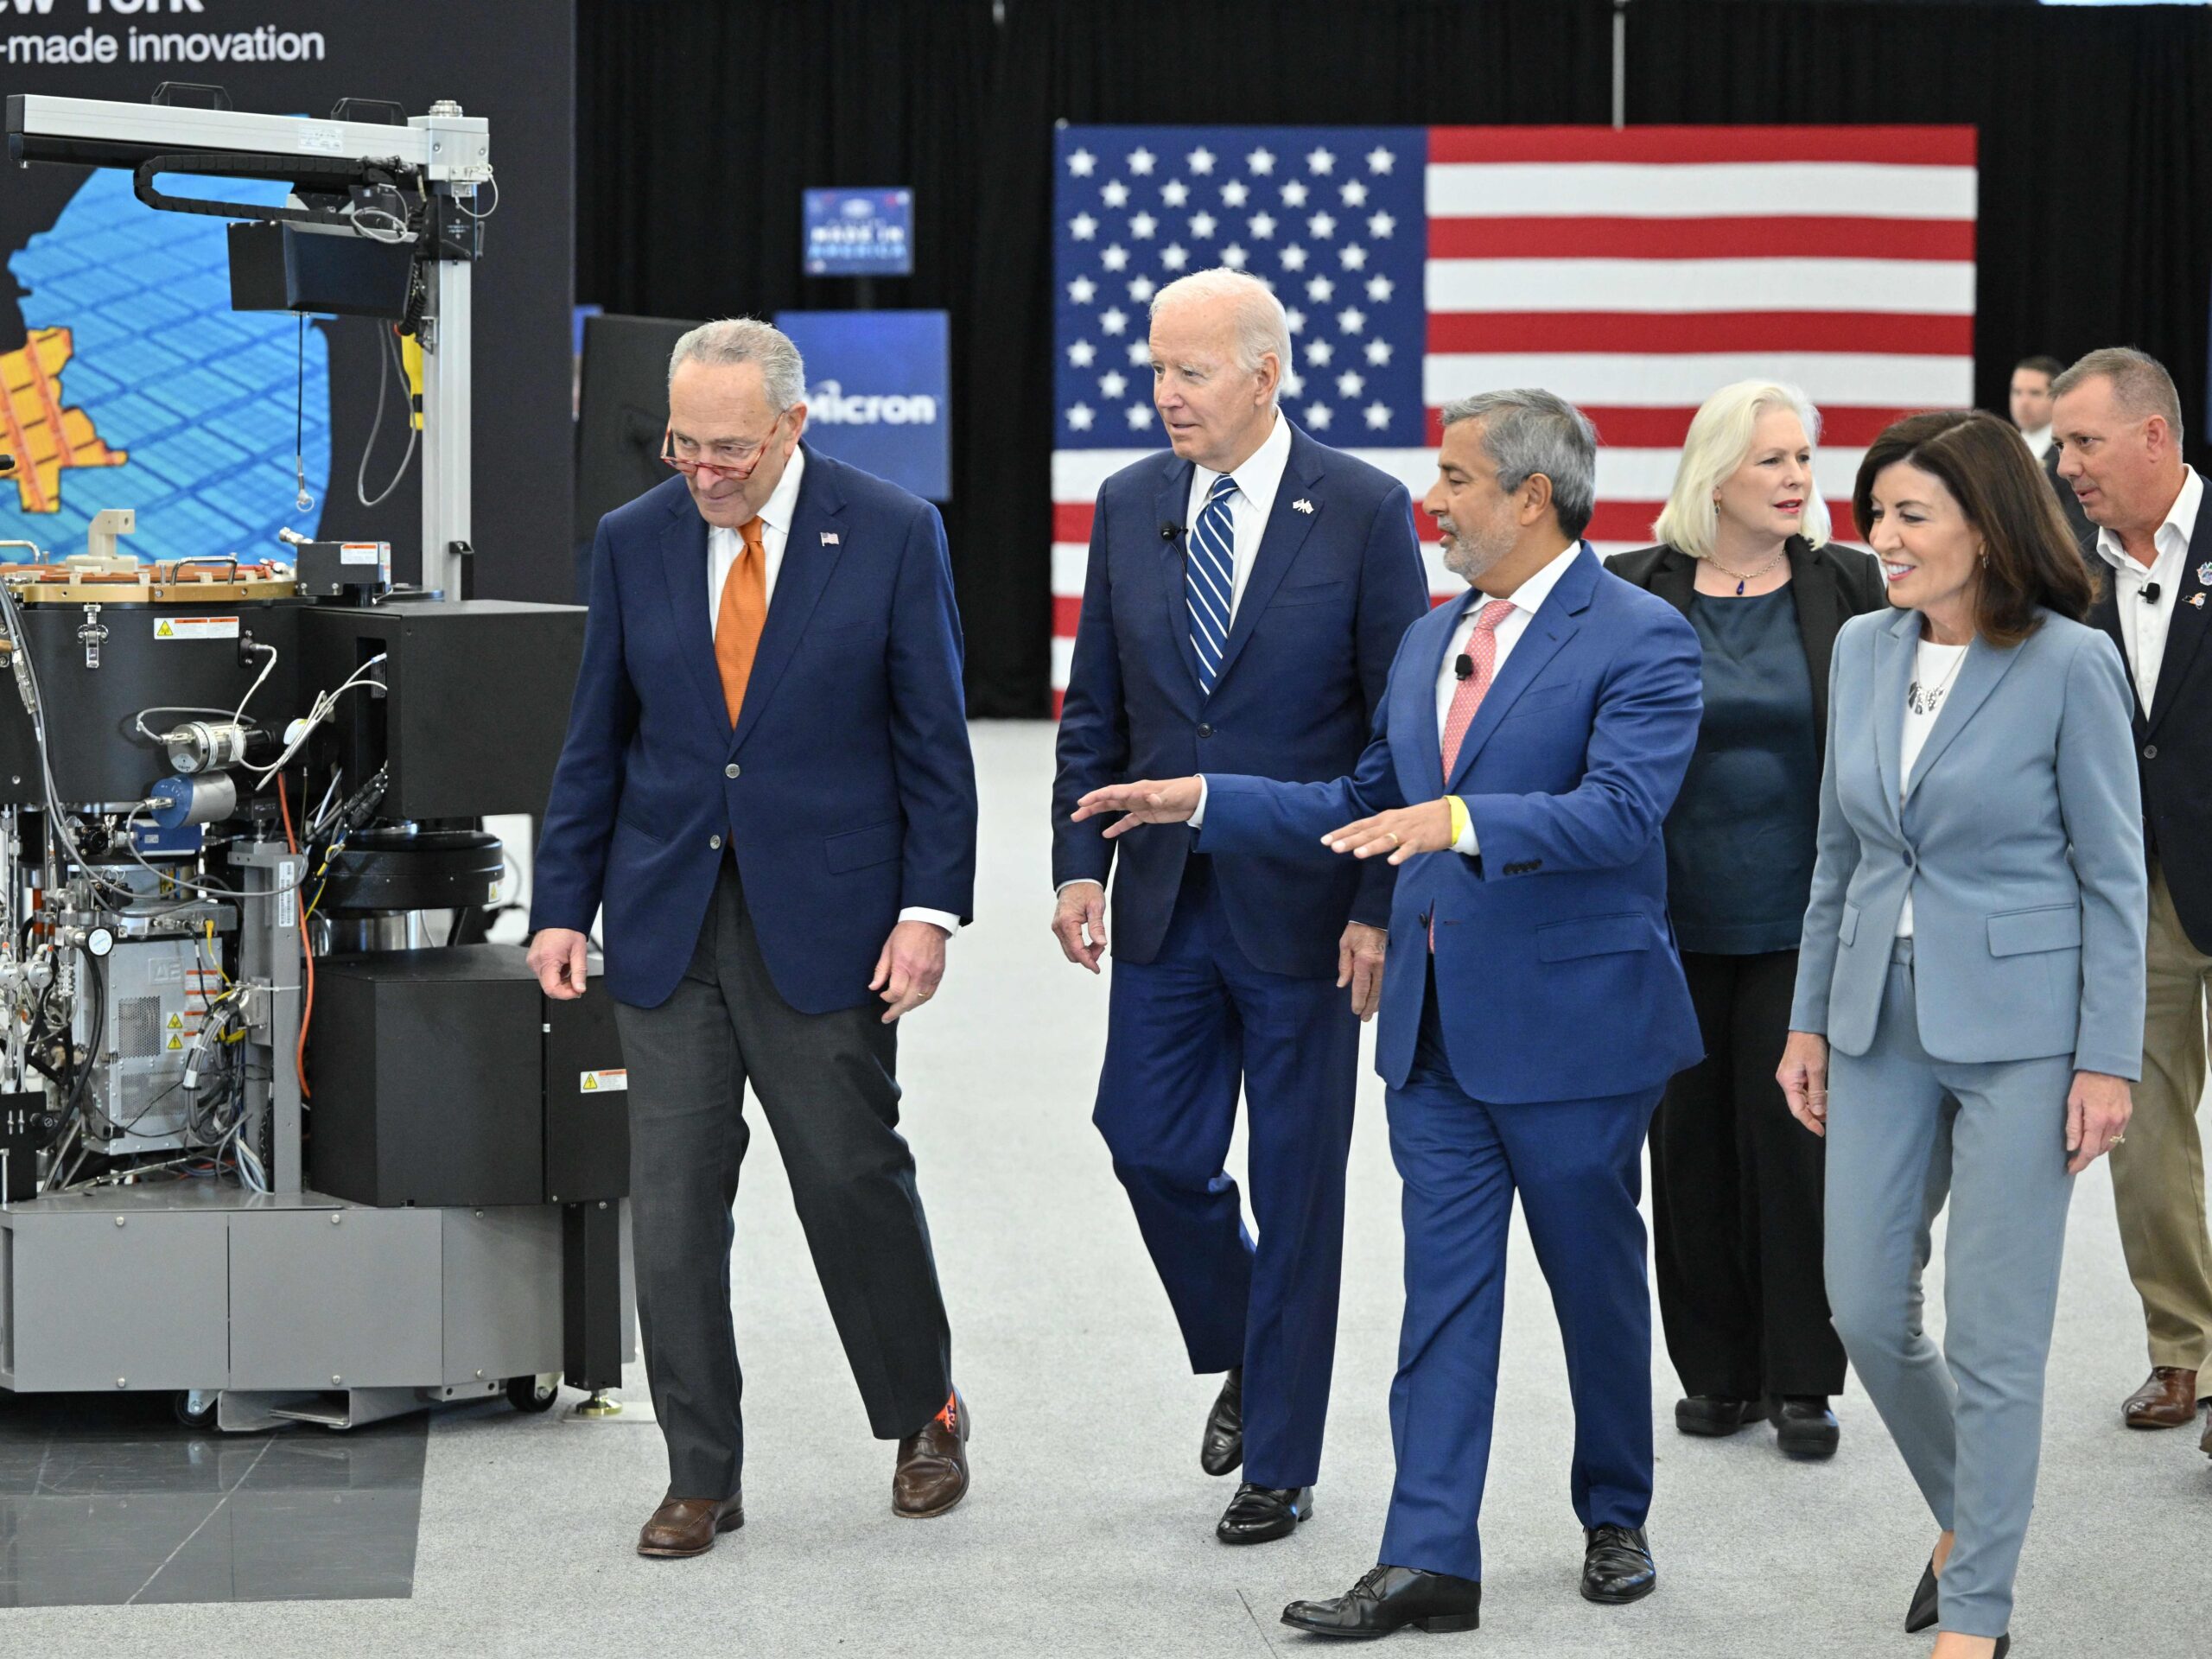 President Biden visited Syracuse on Oct. 27, 2022, with Micron CEO Sanjay Mehrotra, Senate Majority Leader Chuck Schumer, New York Gov. Kathy Hochul and other elected officials.